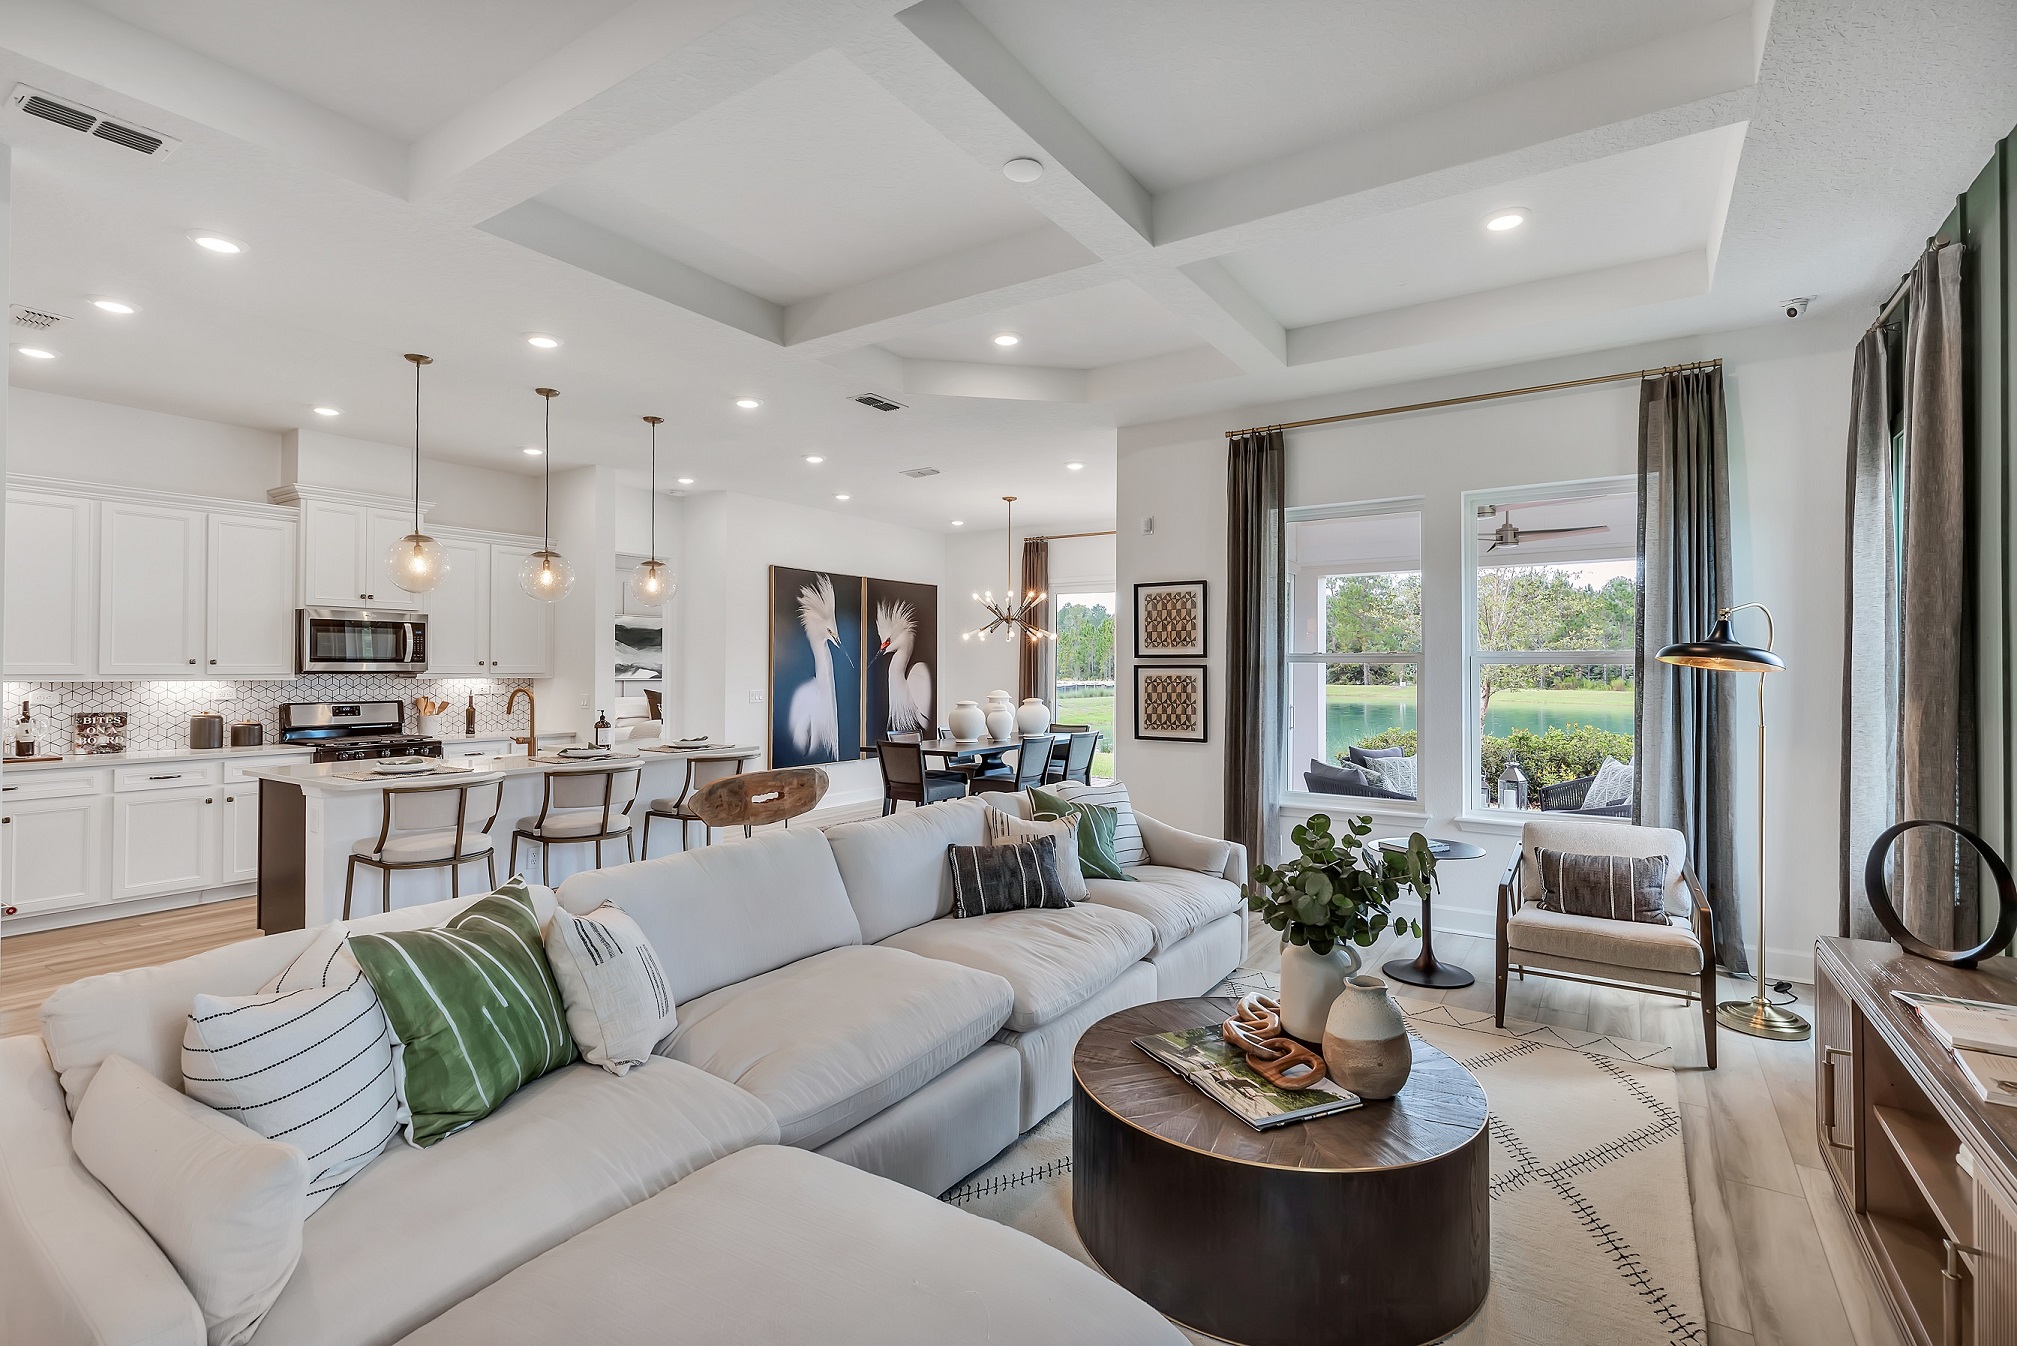 GreenPointe Announces Opening of Model Homes at Dream Finders Homes ...